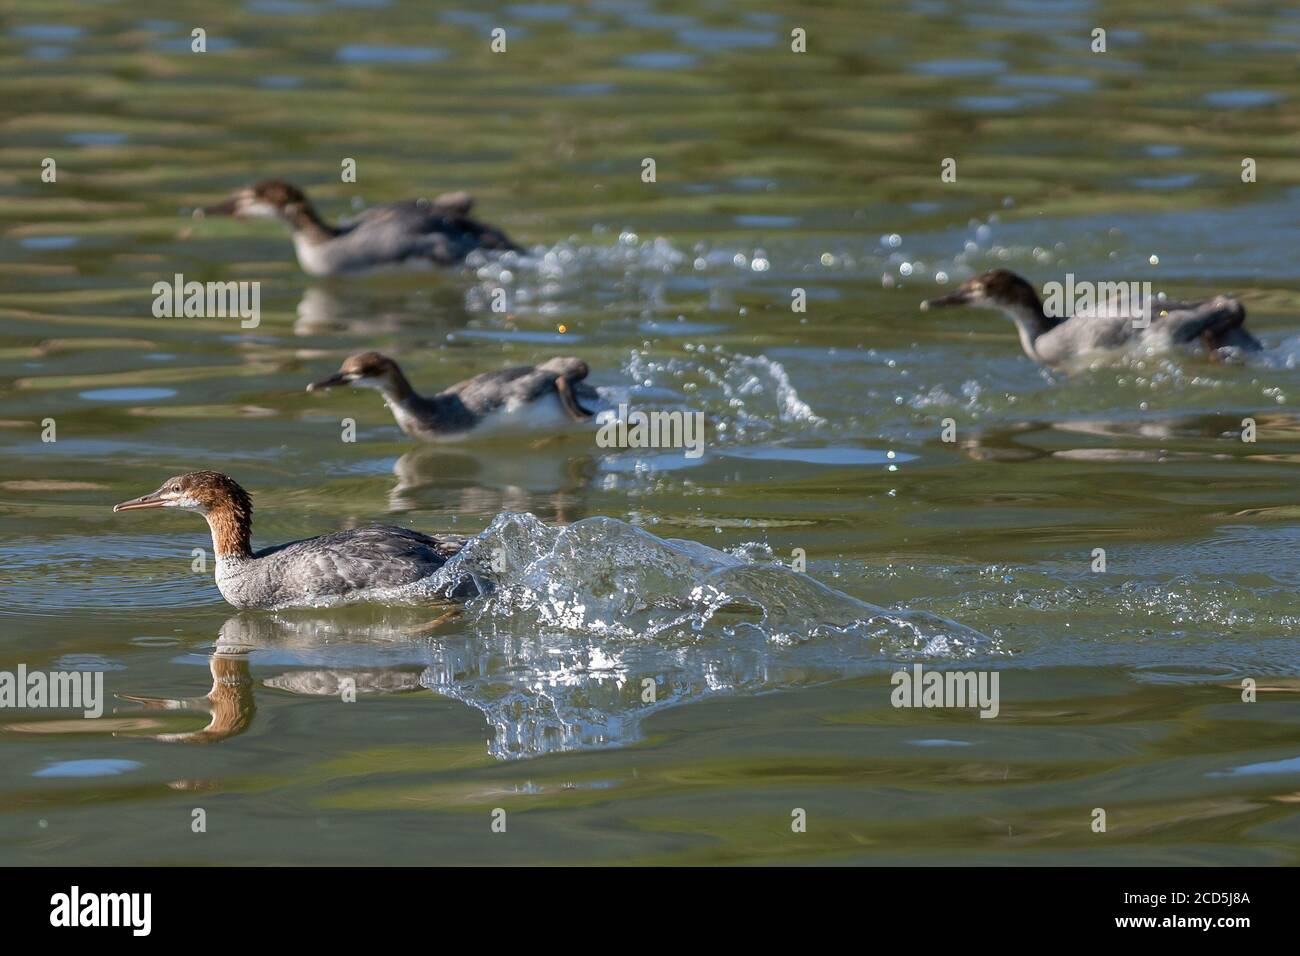 Common Mergansers swimming on the water going after fish. Oregon, Ashland, Emigrant Lake, Summer Stock Photo